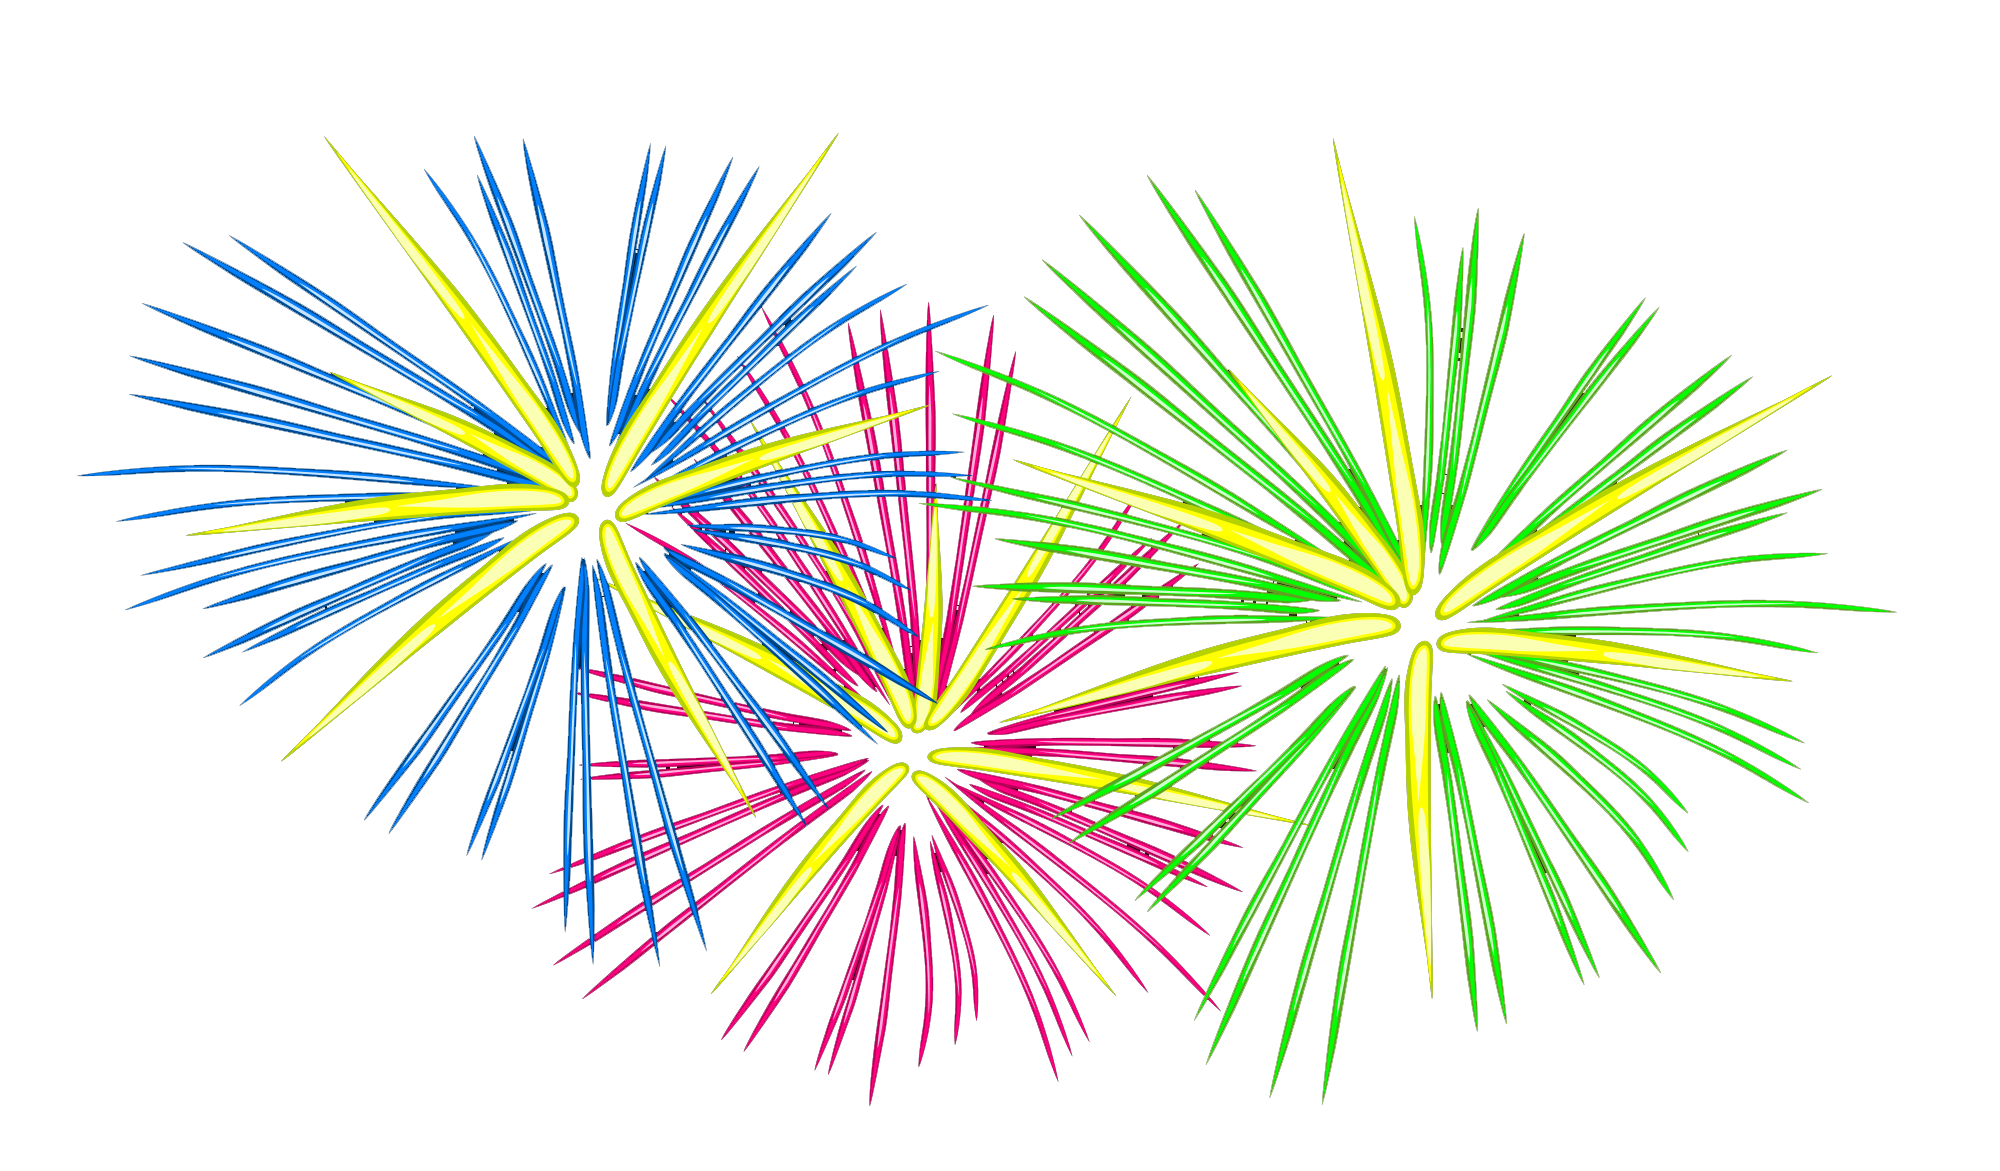 Fireworks clip art fireworks animations clipart downloadclipart org 2